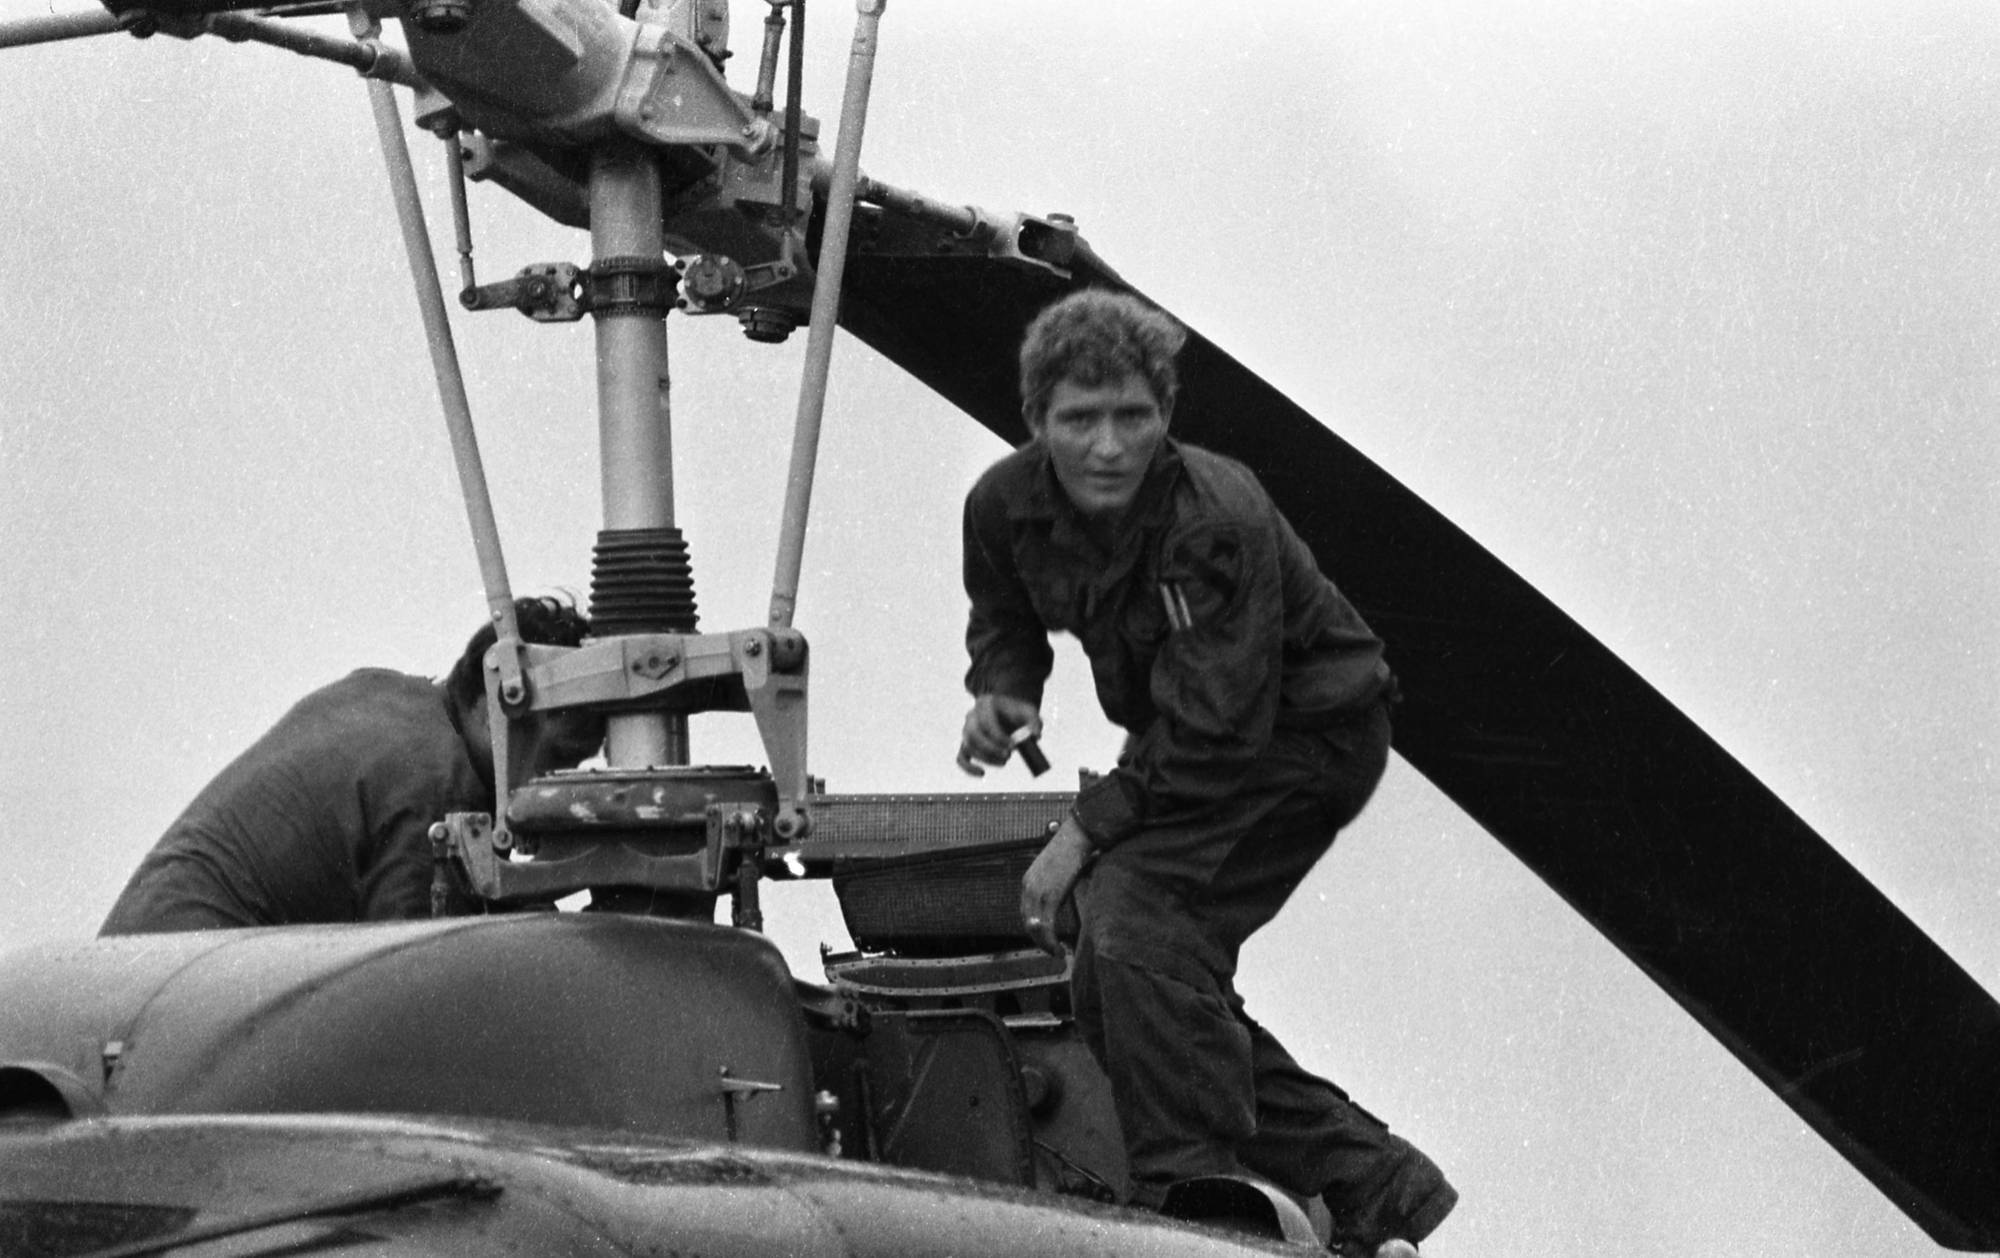 Soldier repairing helicopter blades.